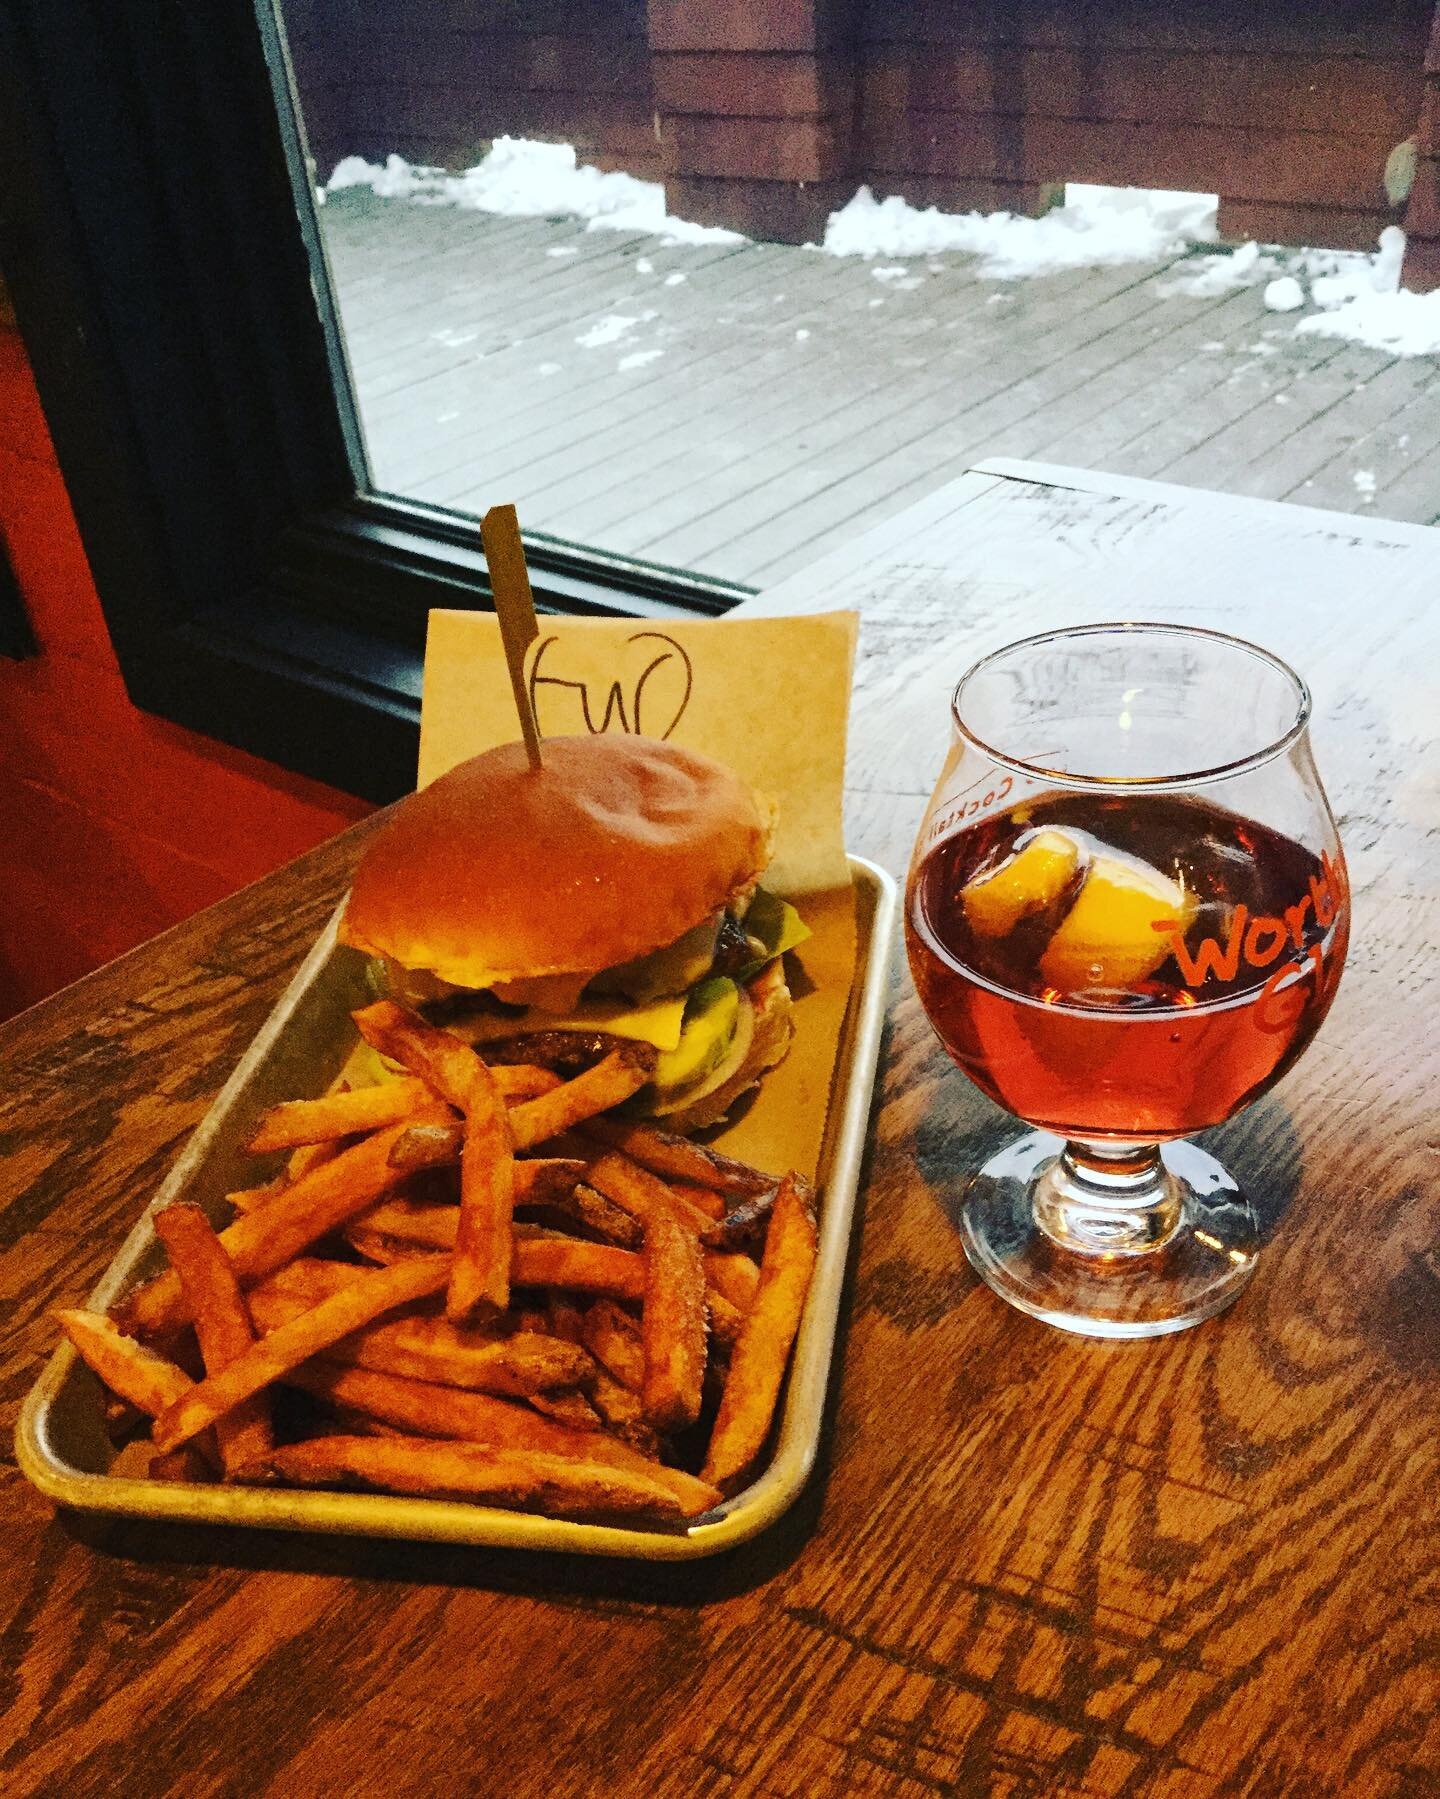 Birthday Special!! Happy 21st Bday Annabelle! 🎉🎉🍻 Come grab a tasty burger and a Belle-Ini cocktail. Here from 4-8 for reservations and take out. Walk-ins welcome as well.